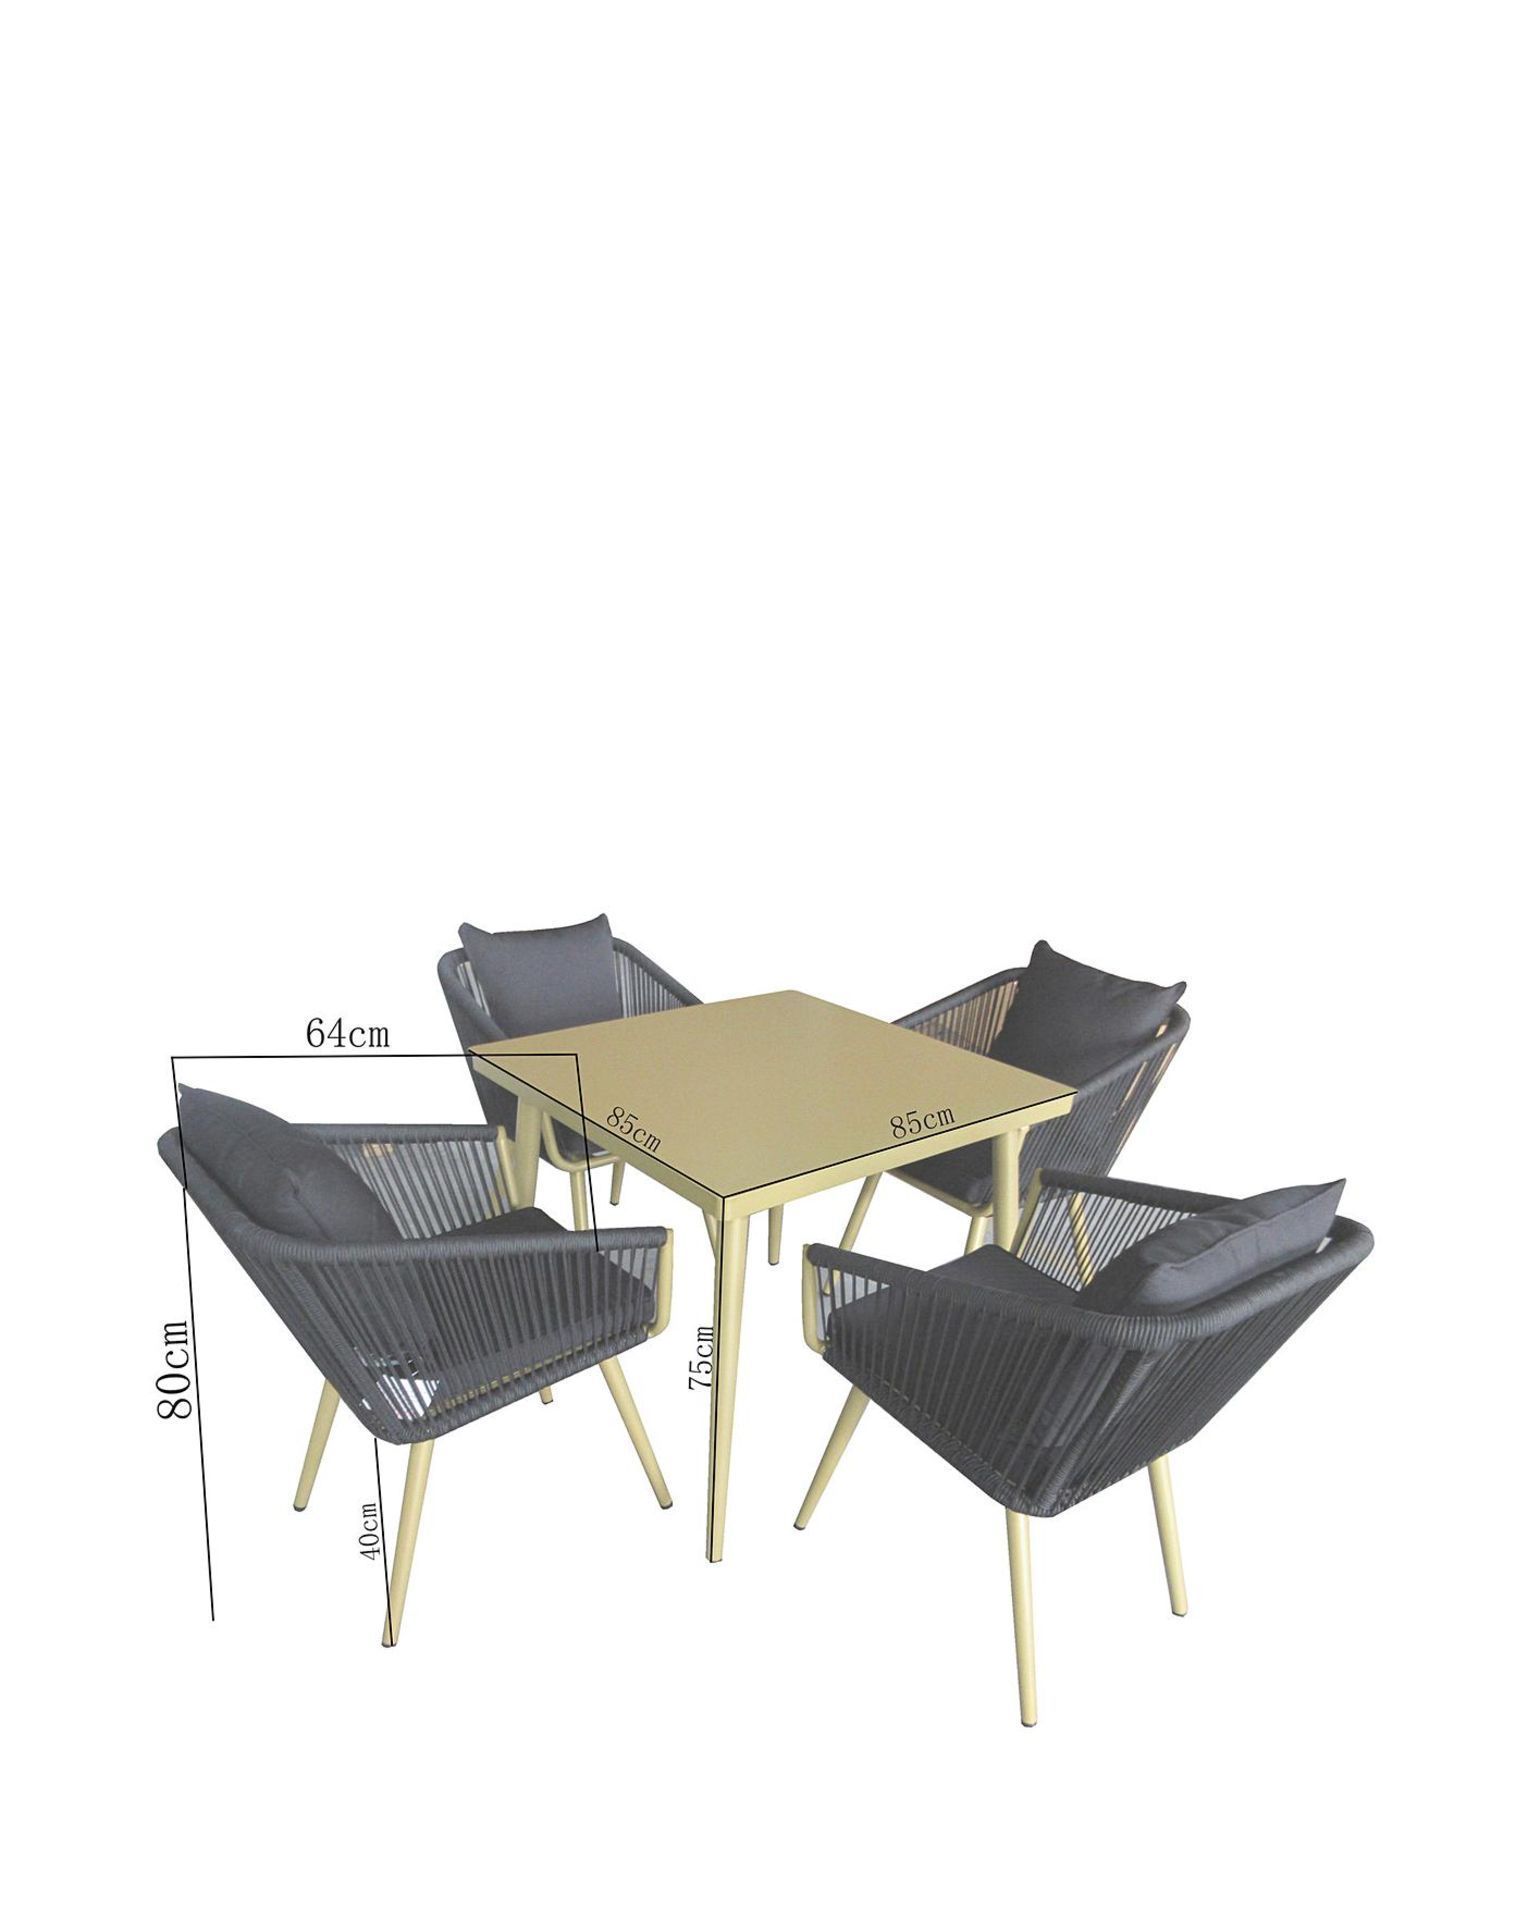 Trade Lot 4 x New & Packaged Joanna Hope Naya 4 Seater Dining Sets. RRP £719 each. This Exclusive - Image 10 of 11